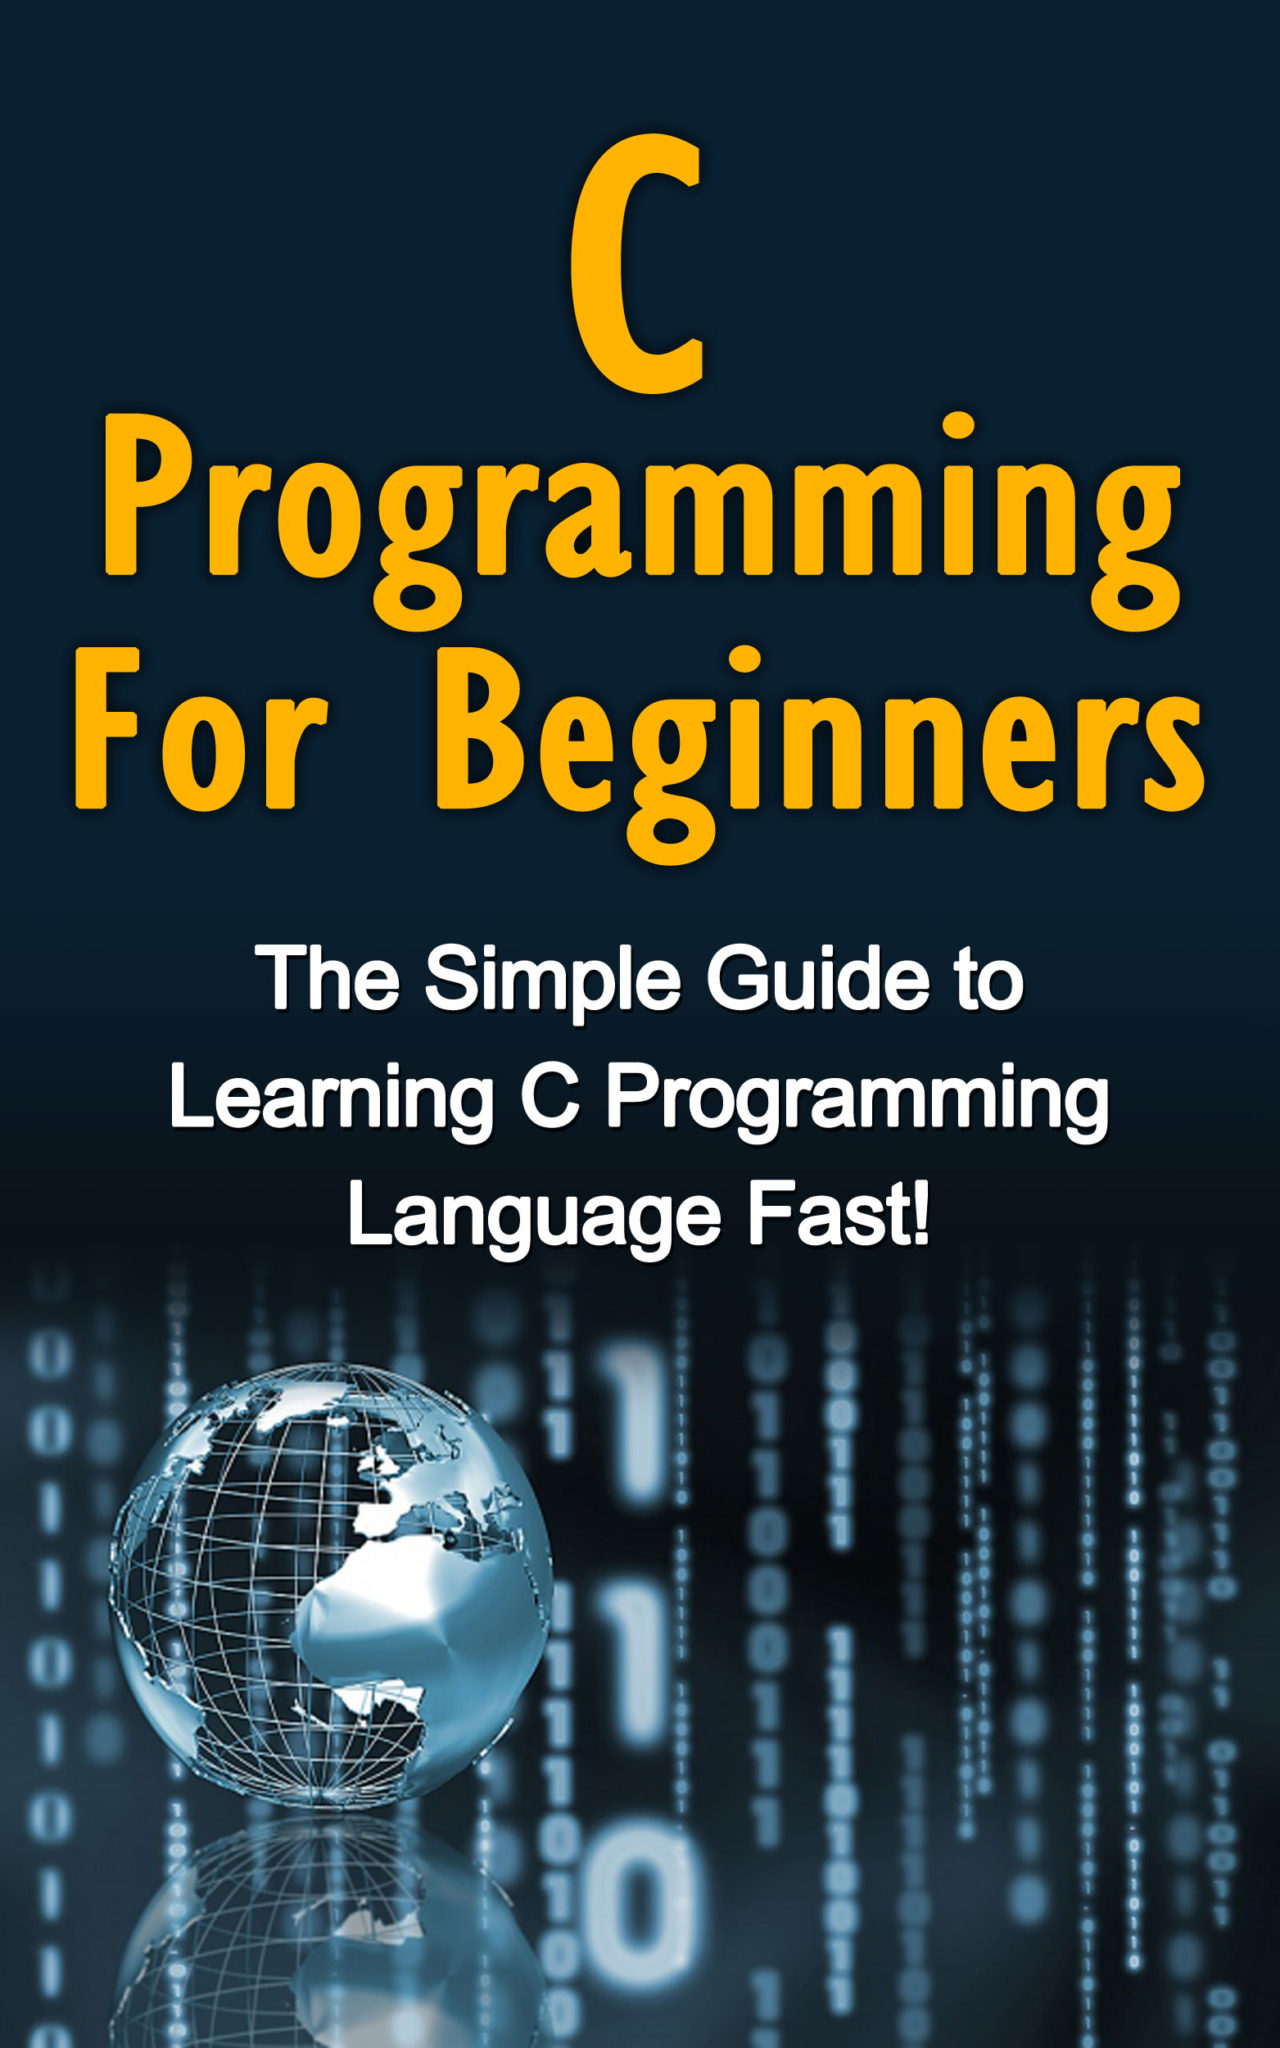 FREE: C Programming For Beginners: The Simple Guide to Learning C Programming Language Fast! by Tim Warren